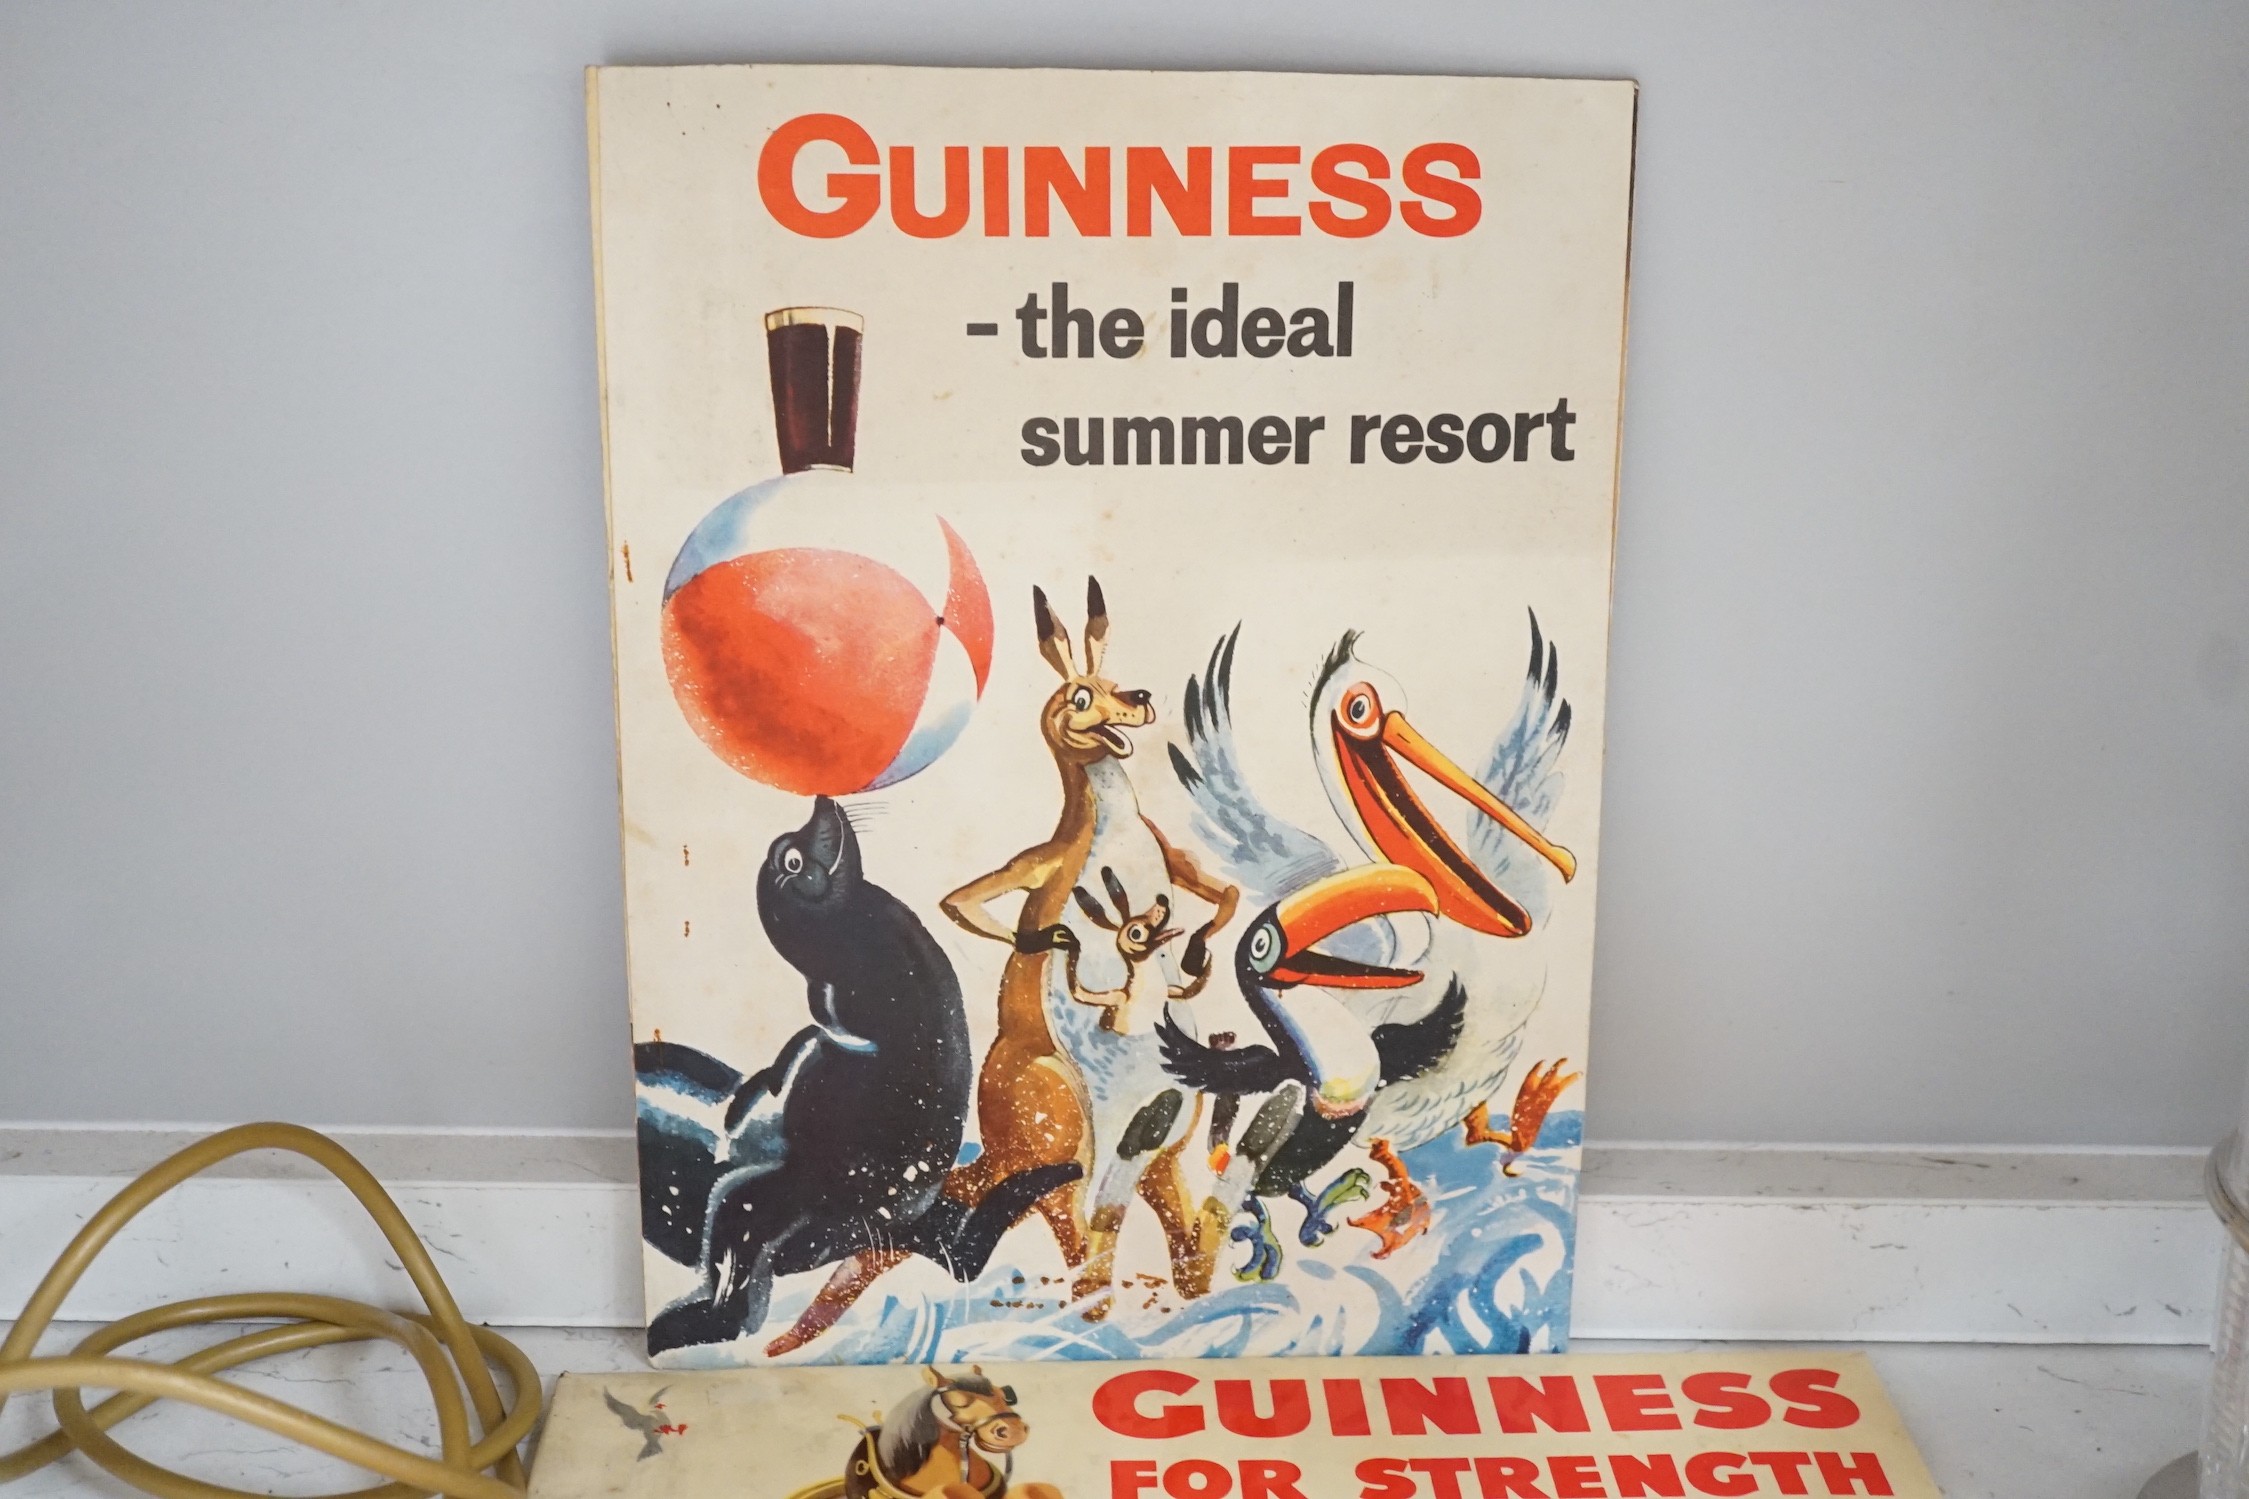 Five Guinness advertising signs, mirror, trays and a book - St. James’s Gate Brewery History and - Image 3 of 5